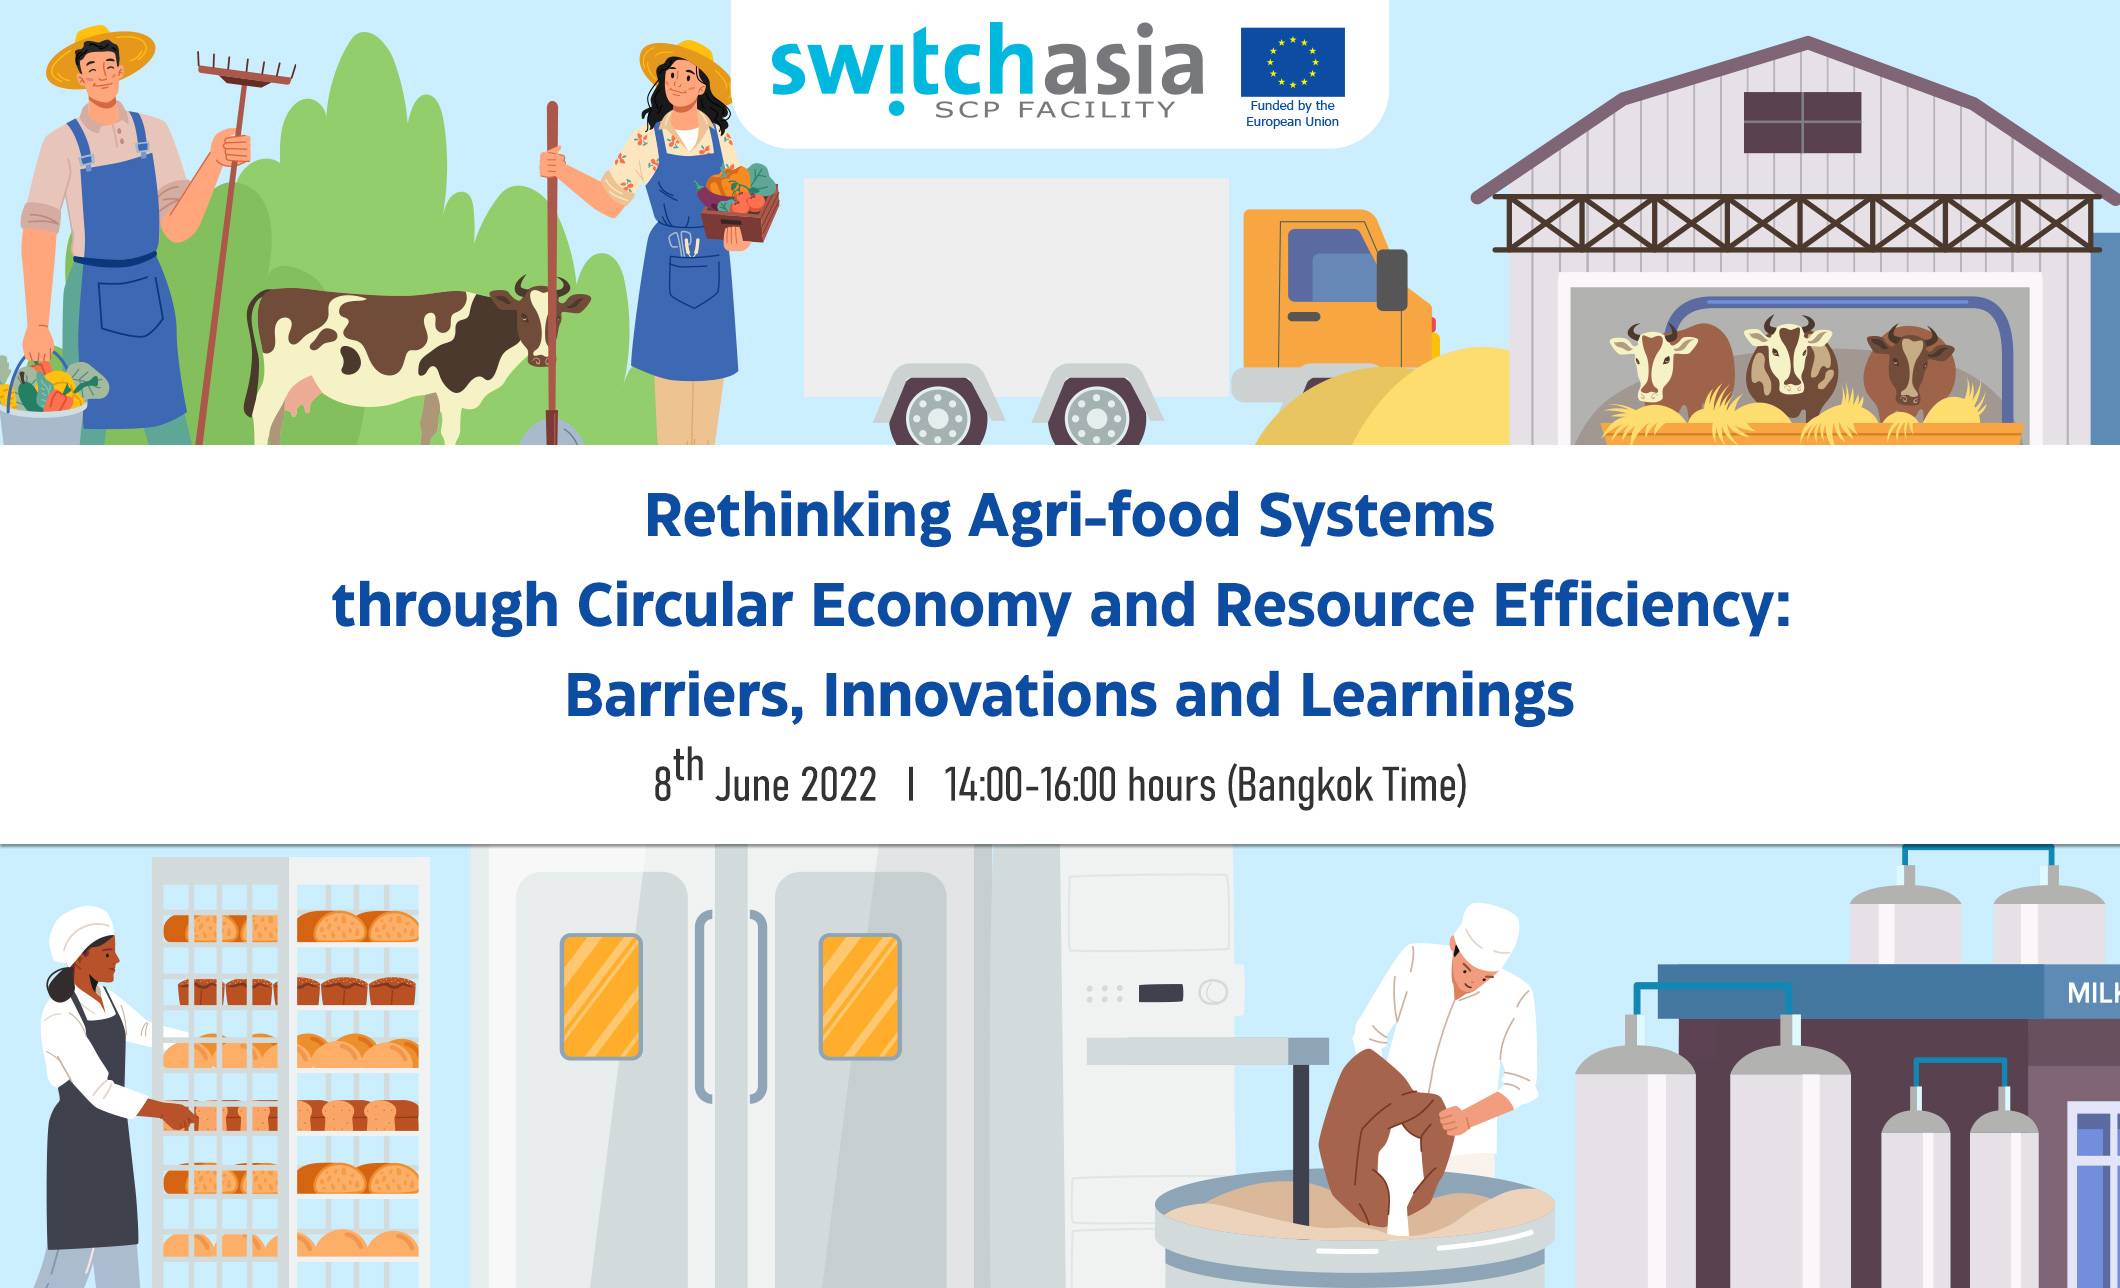 Rethinking Agri-food Systems through Circular Economy and Resource Efficiency: Barriers, Innovations and Learnings